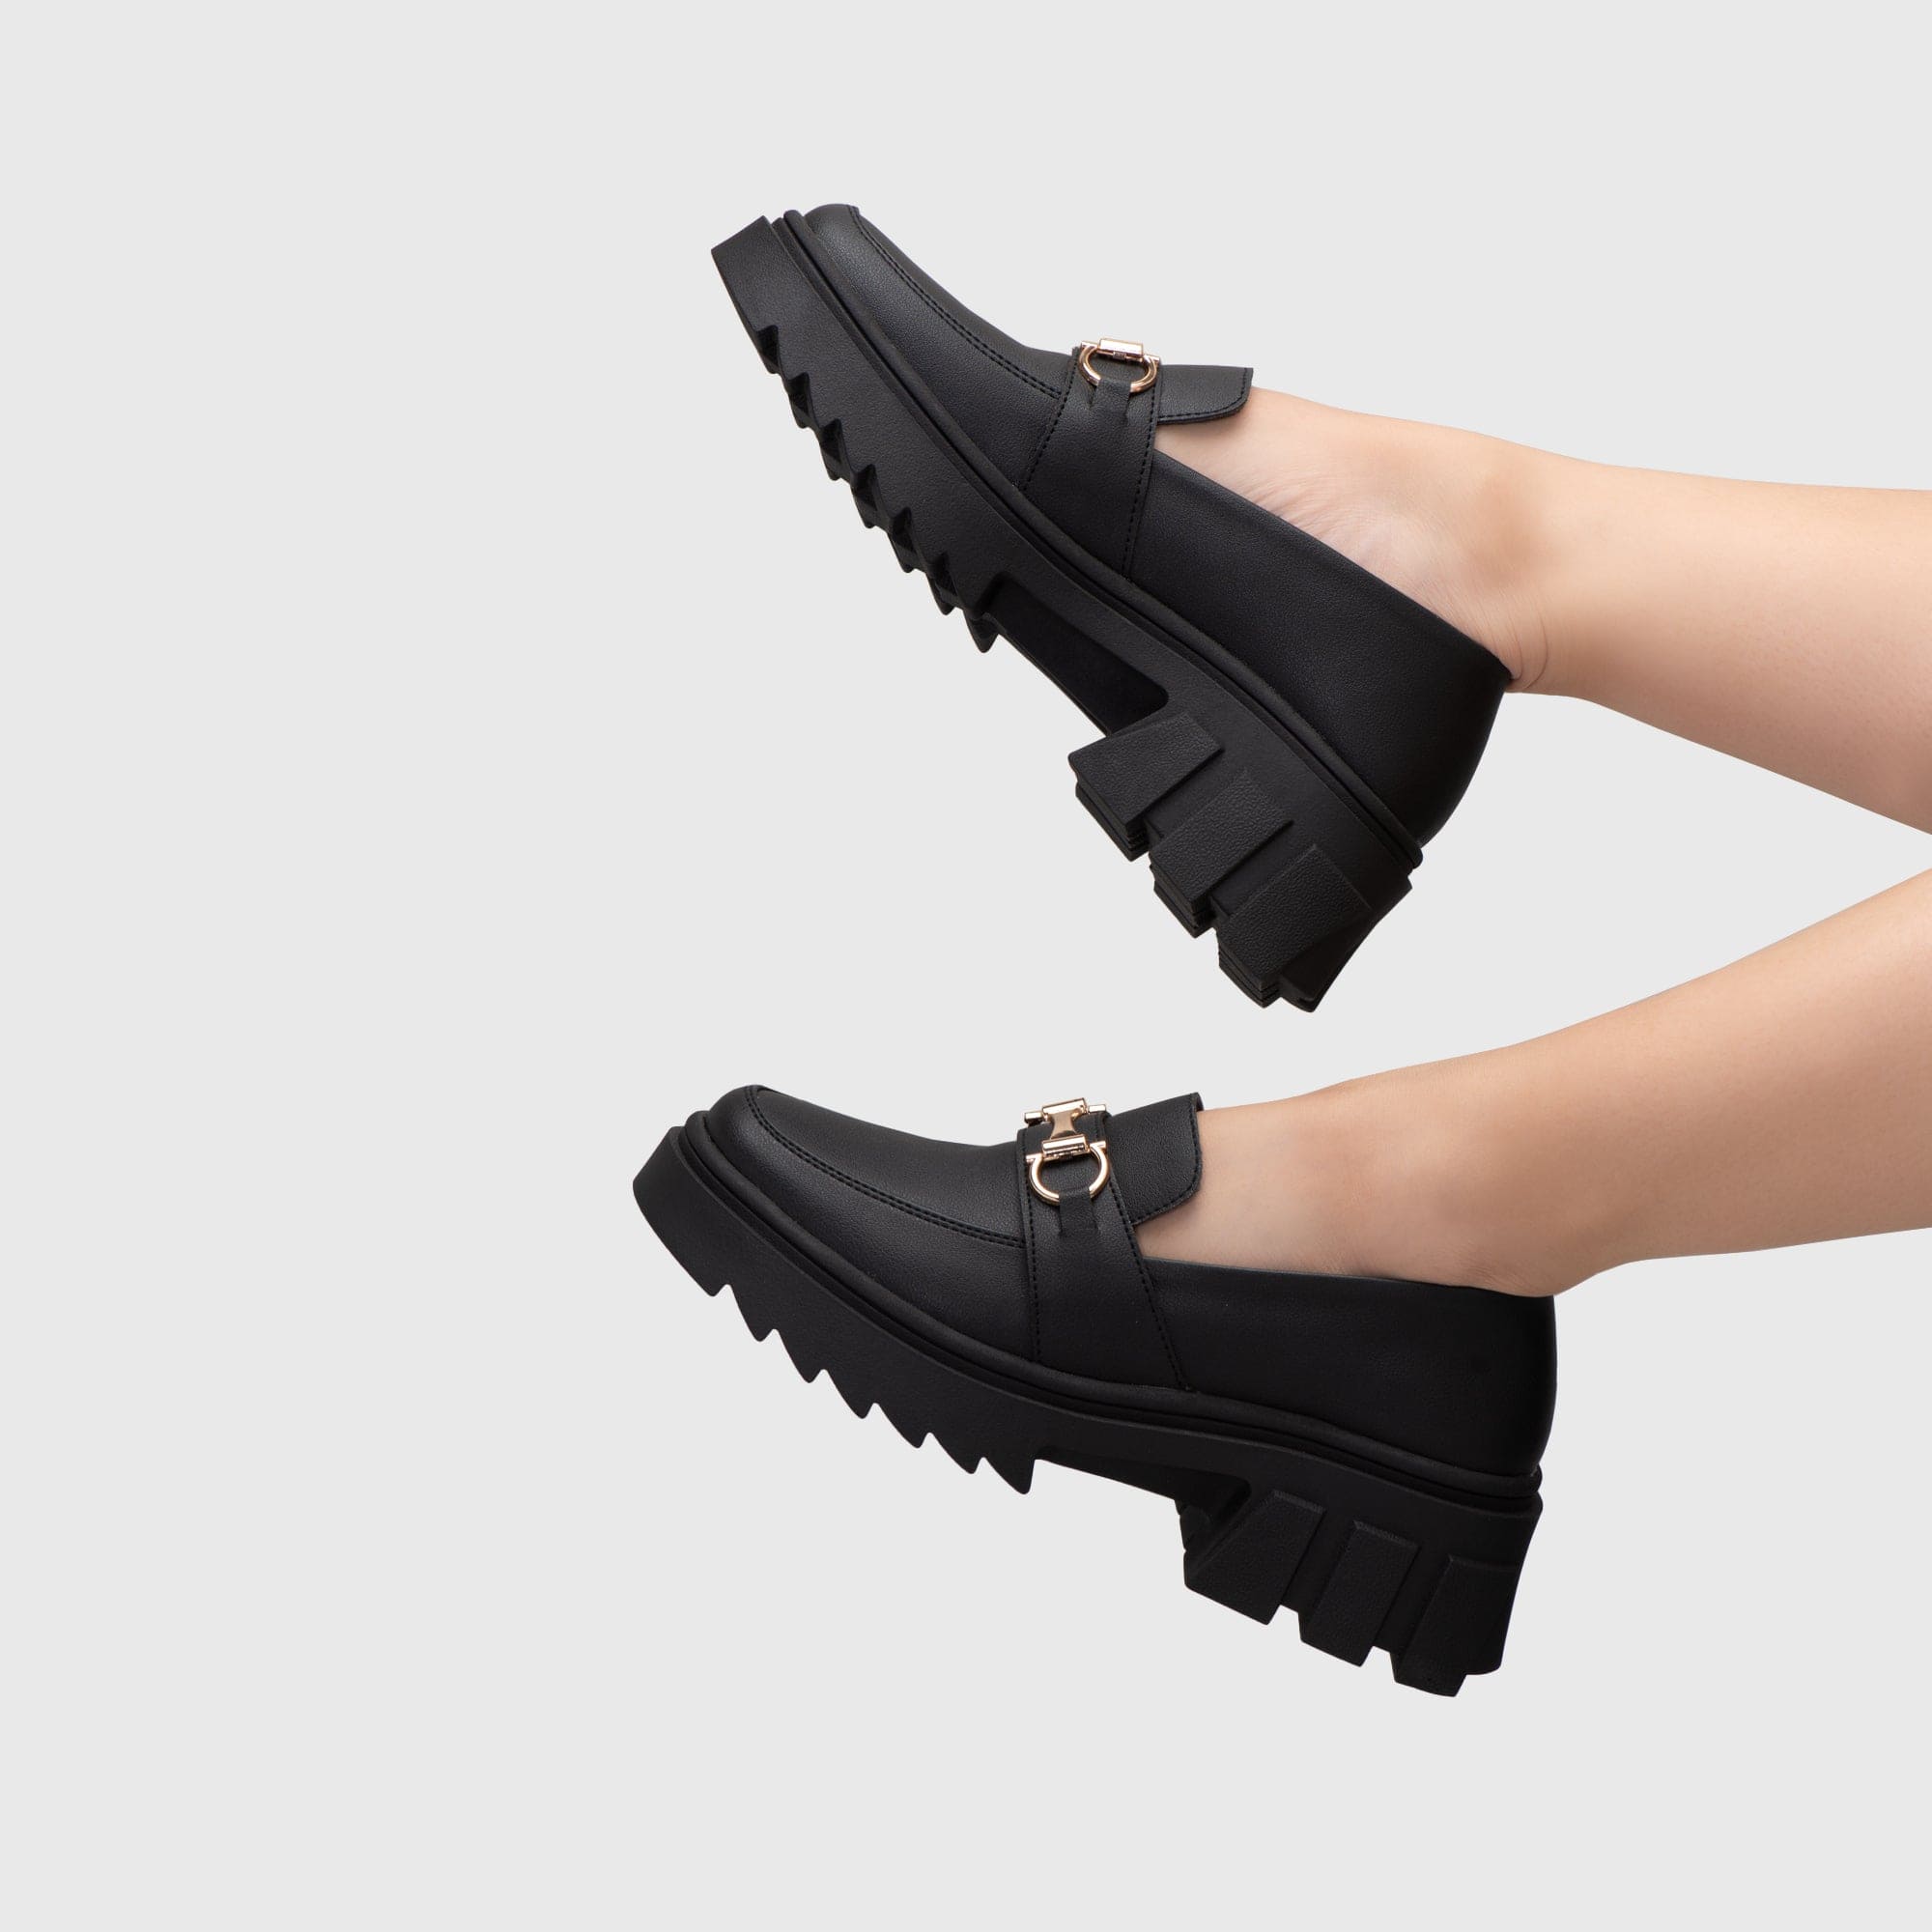 Adorable Projects Official Adorableprojects - Sillia Oxford Black - Penny Loafer